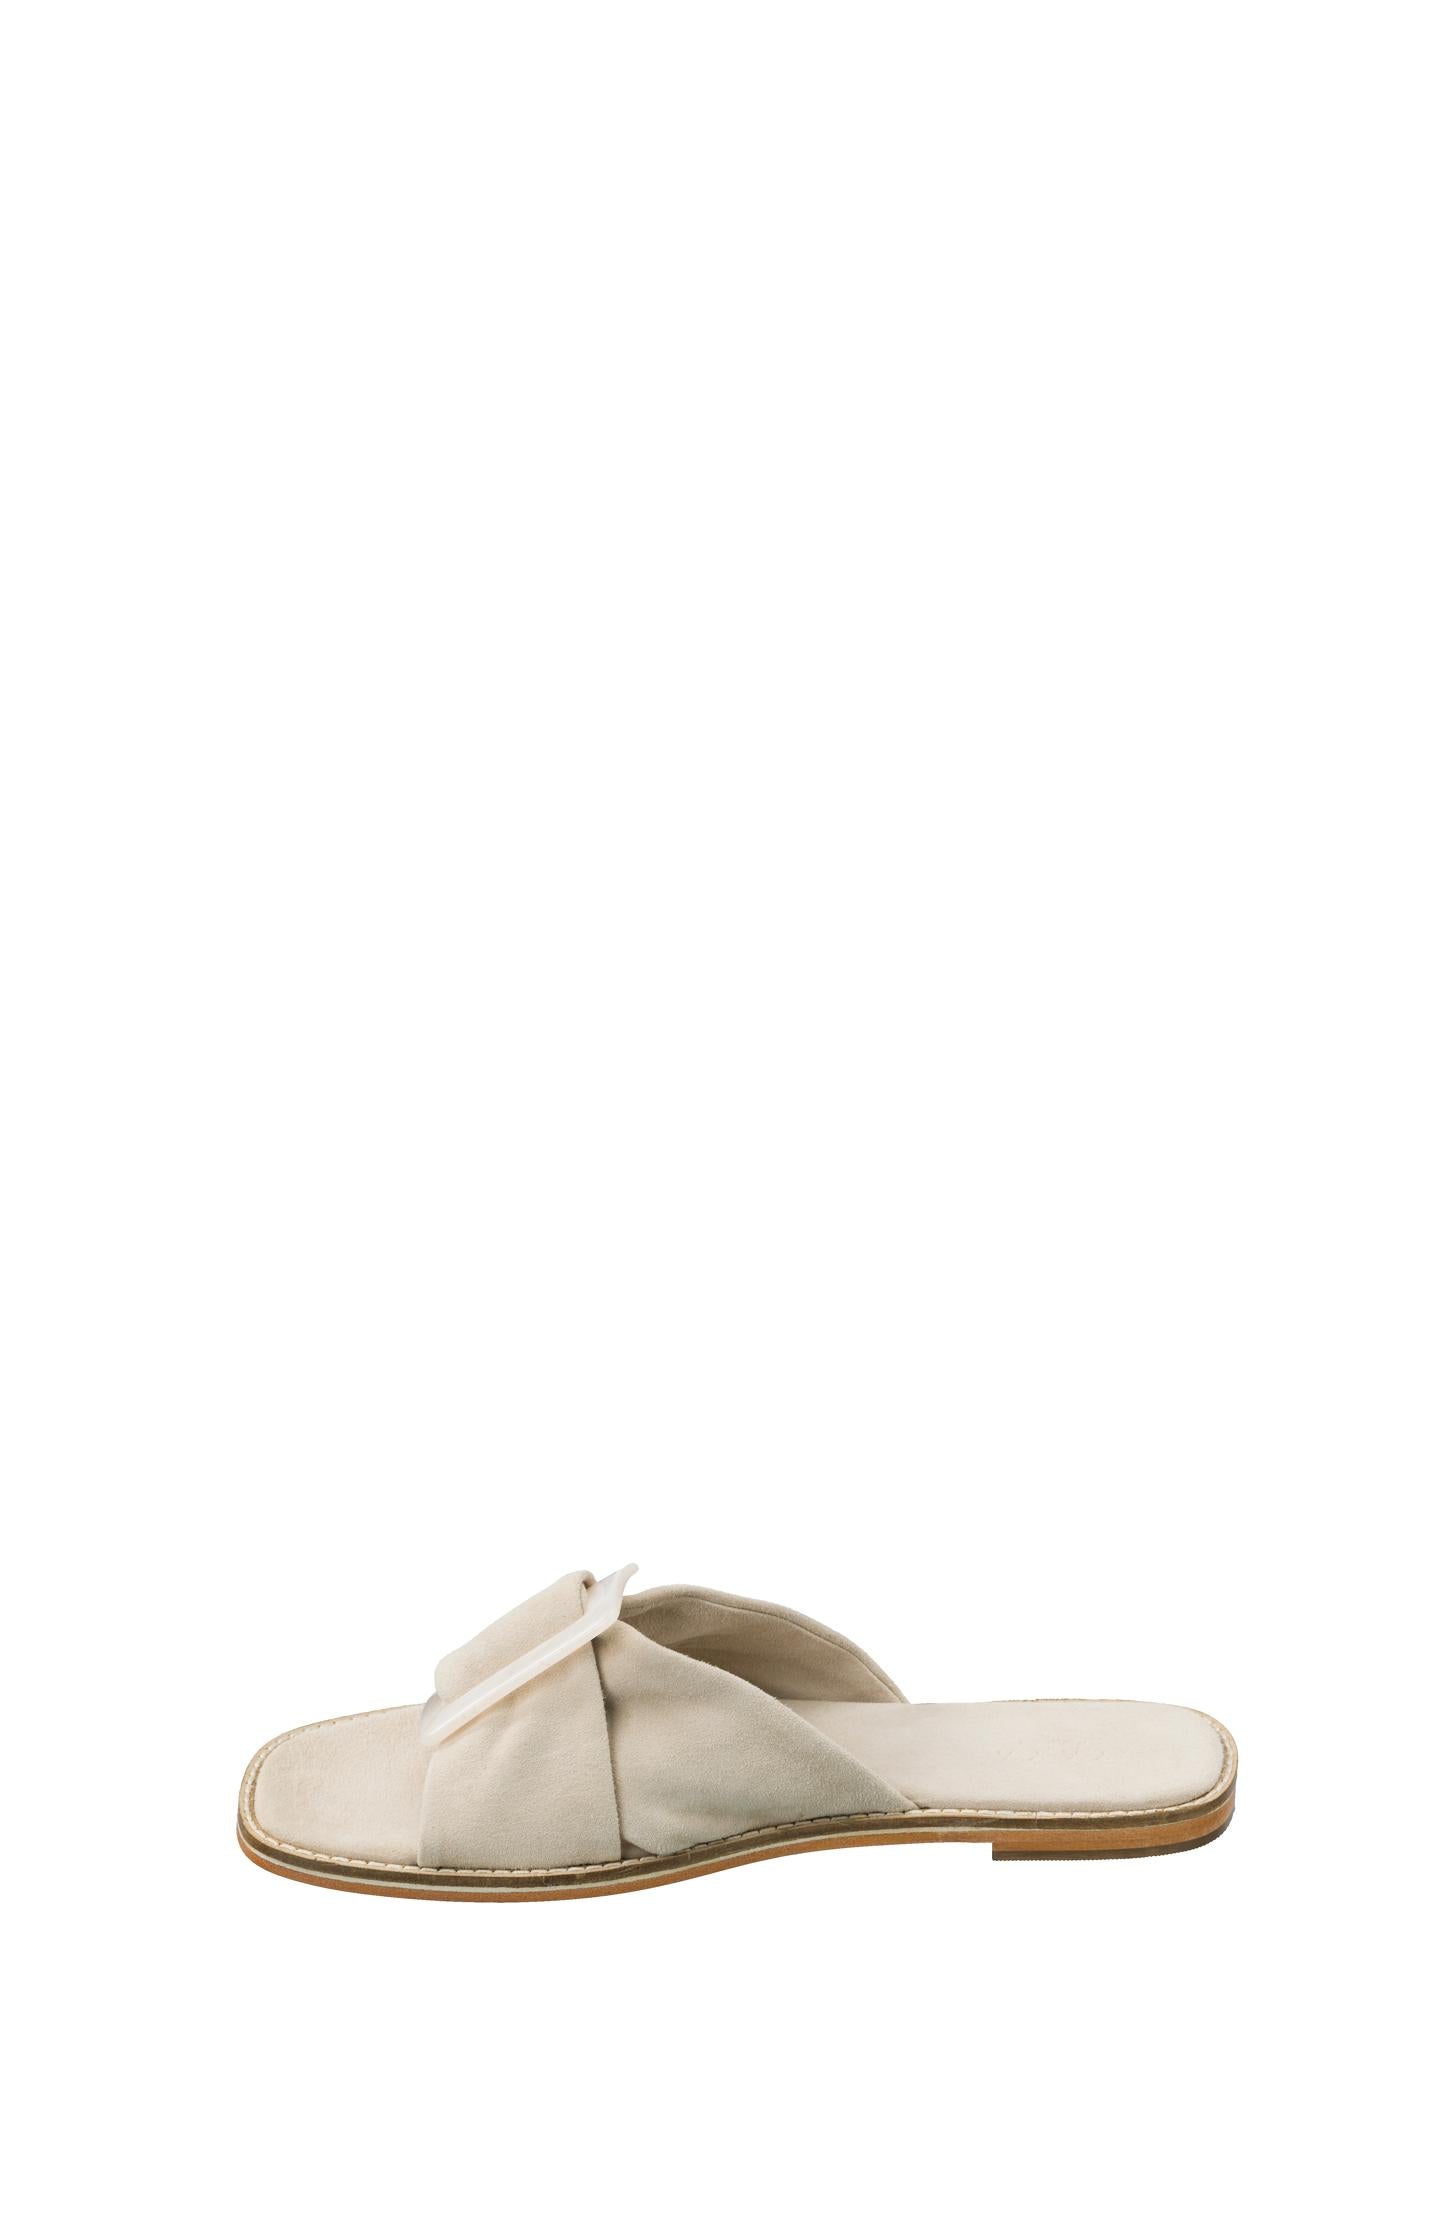 Suede slipper with buckle and crossed straps - Safari Sand